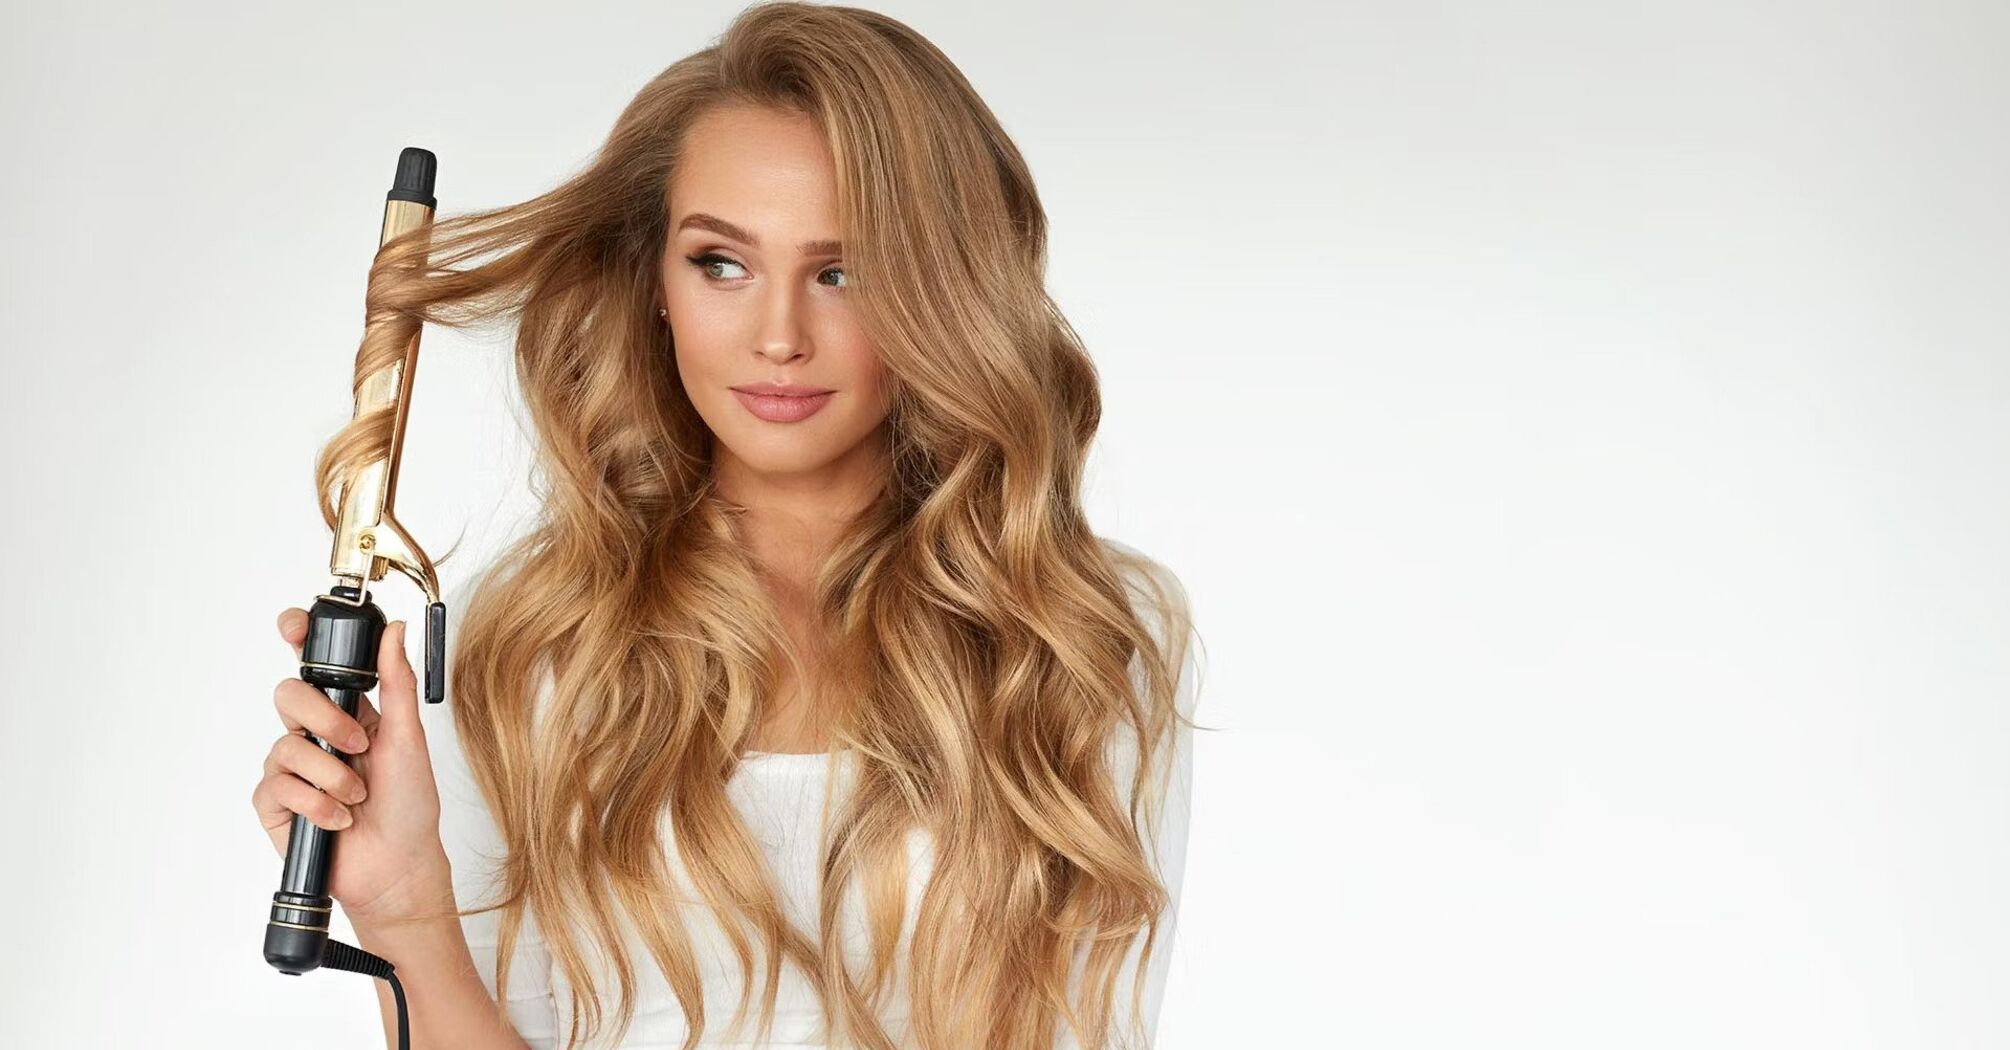 Advantages and disadvantages of a hair curling iron